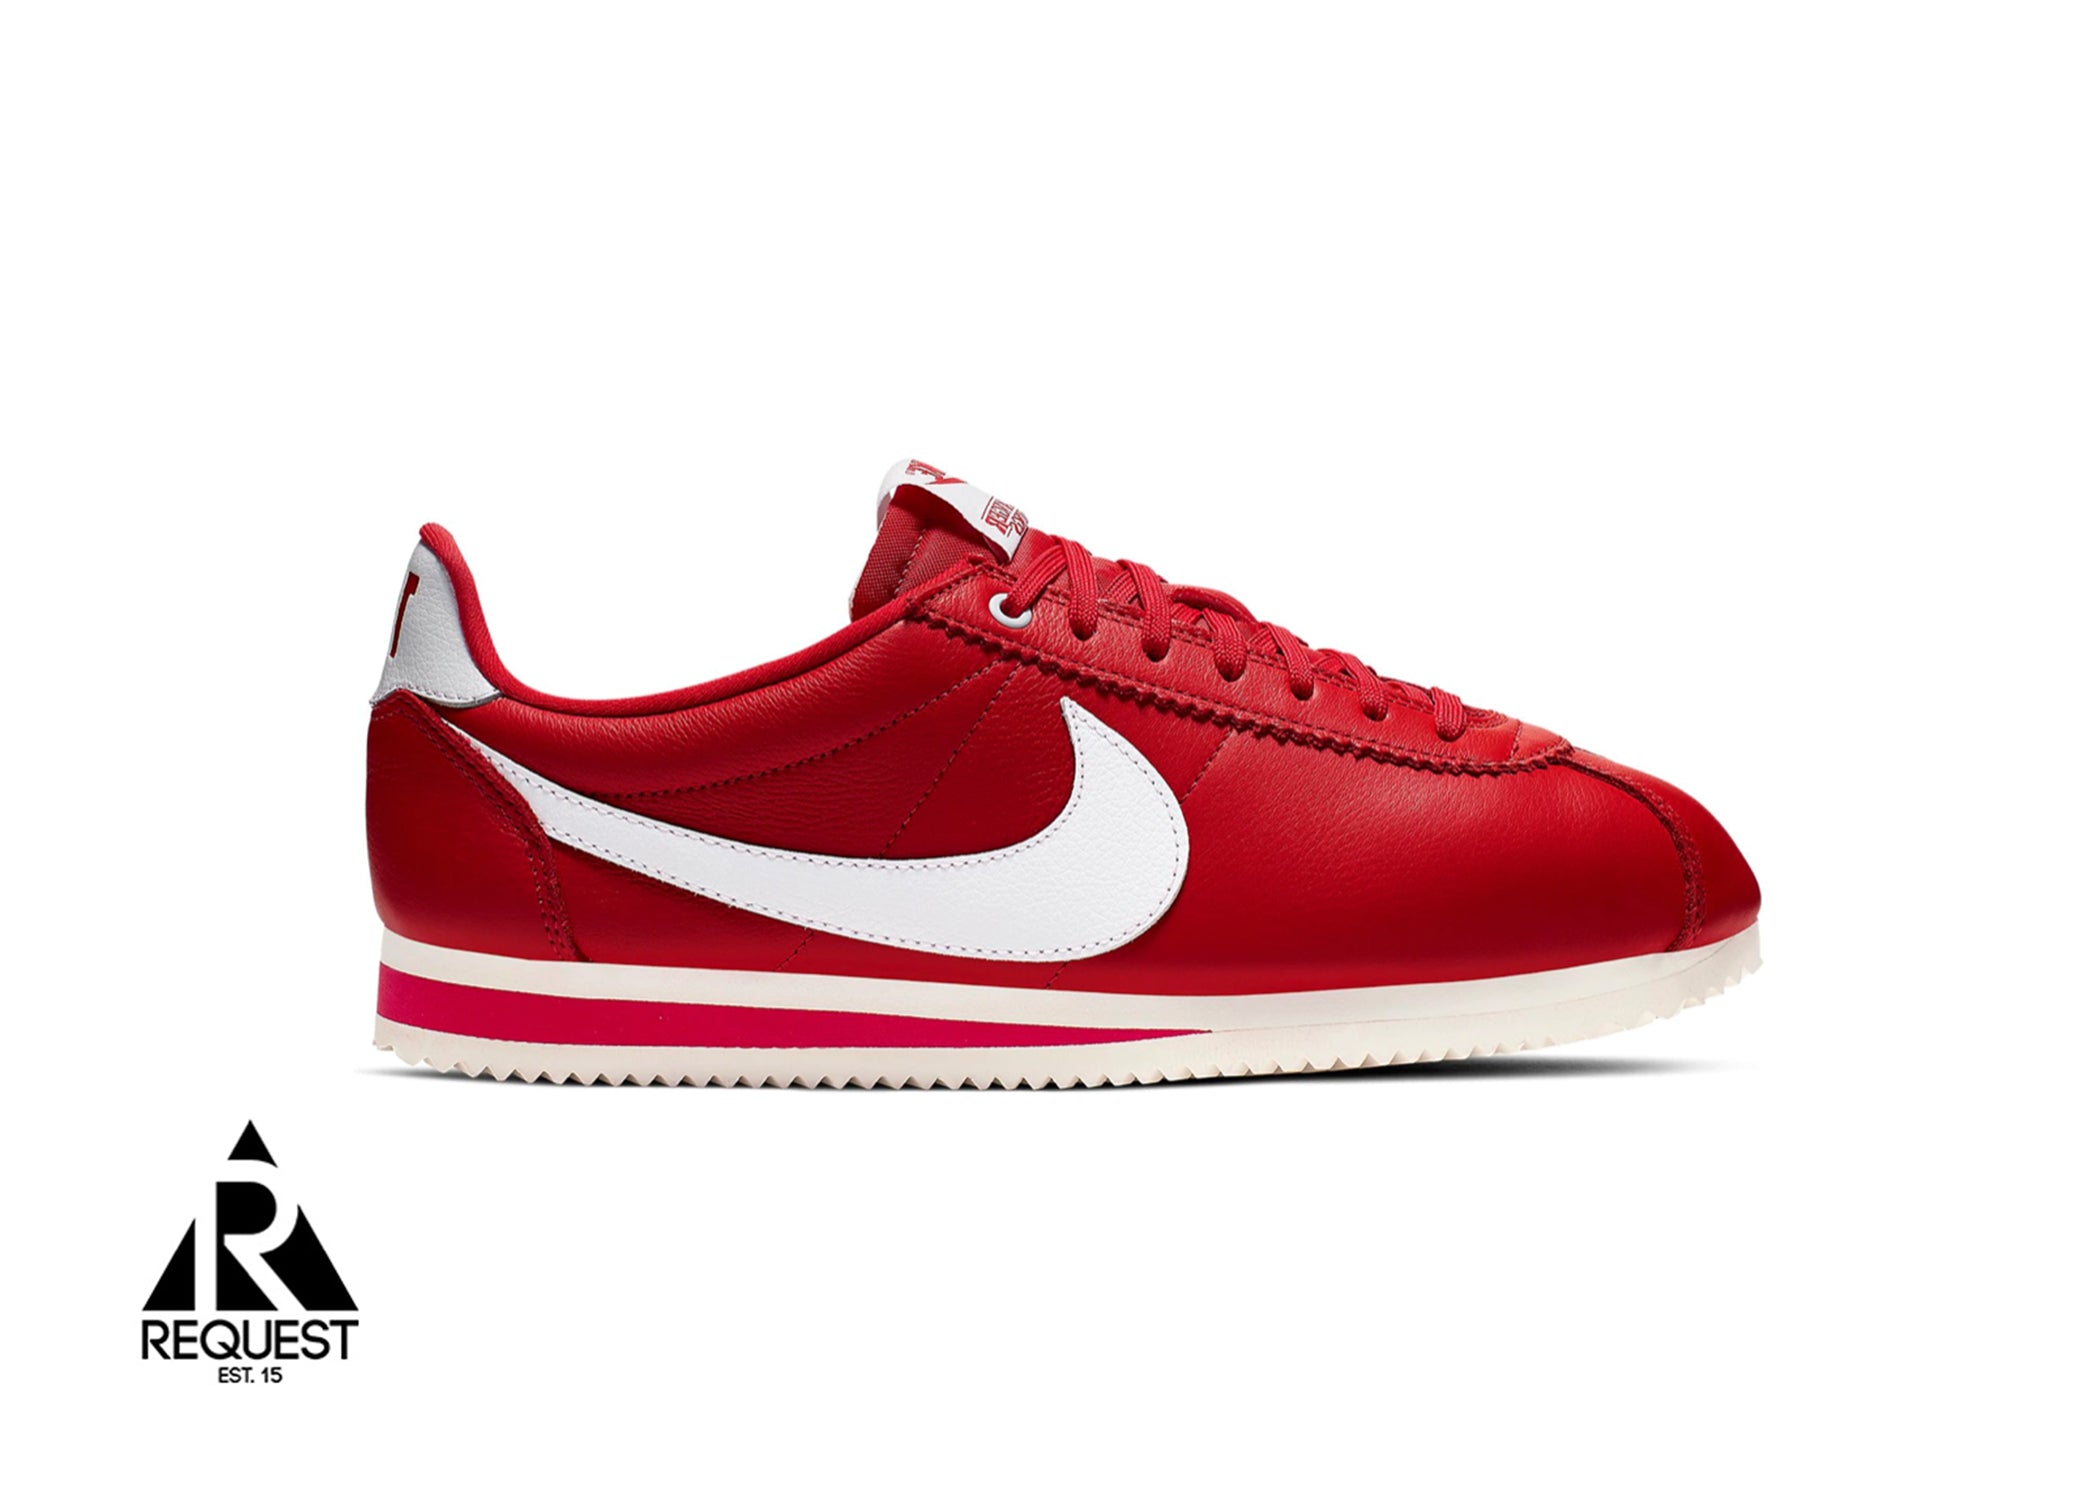 Nike Classic Cortez Stranger Things “Independence Day”